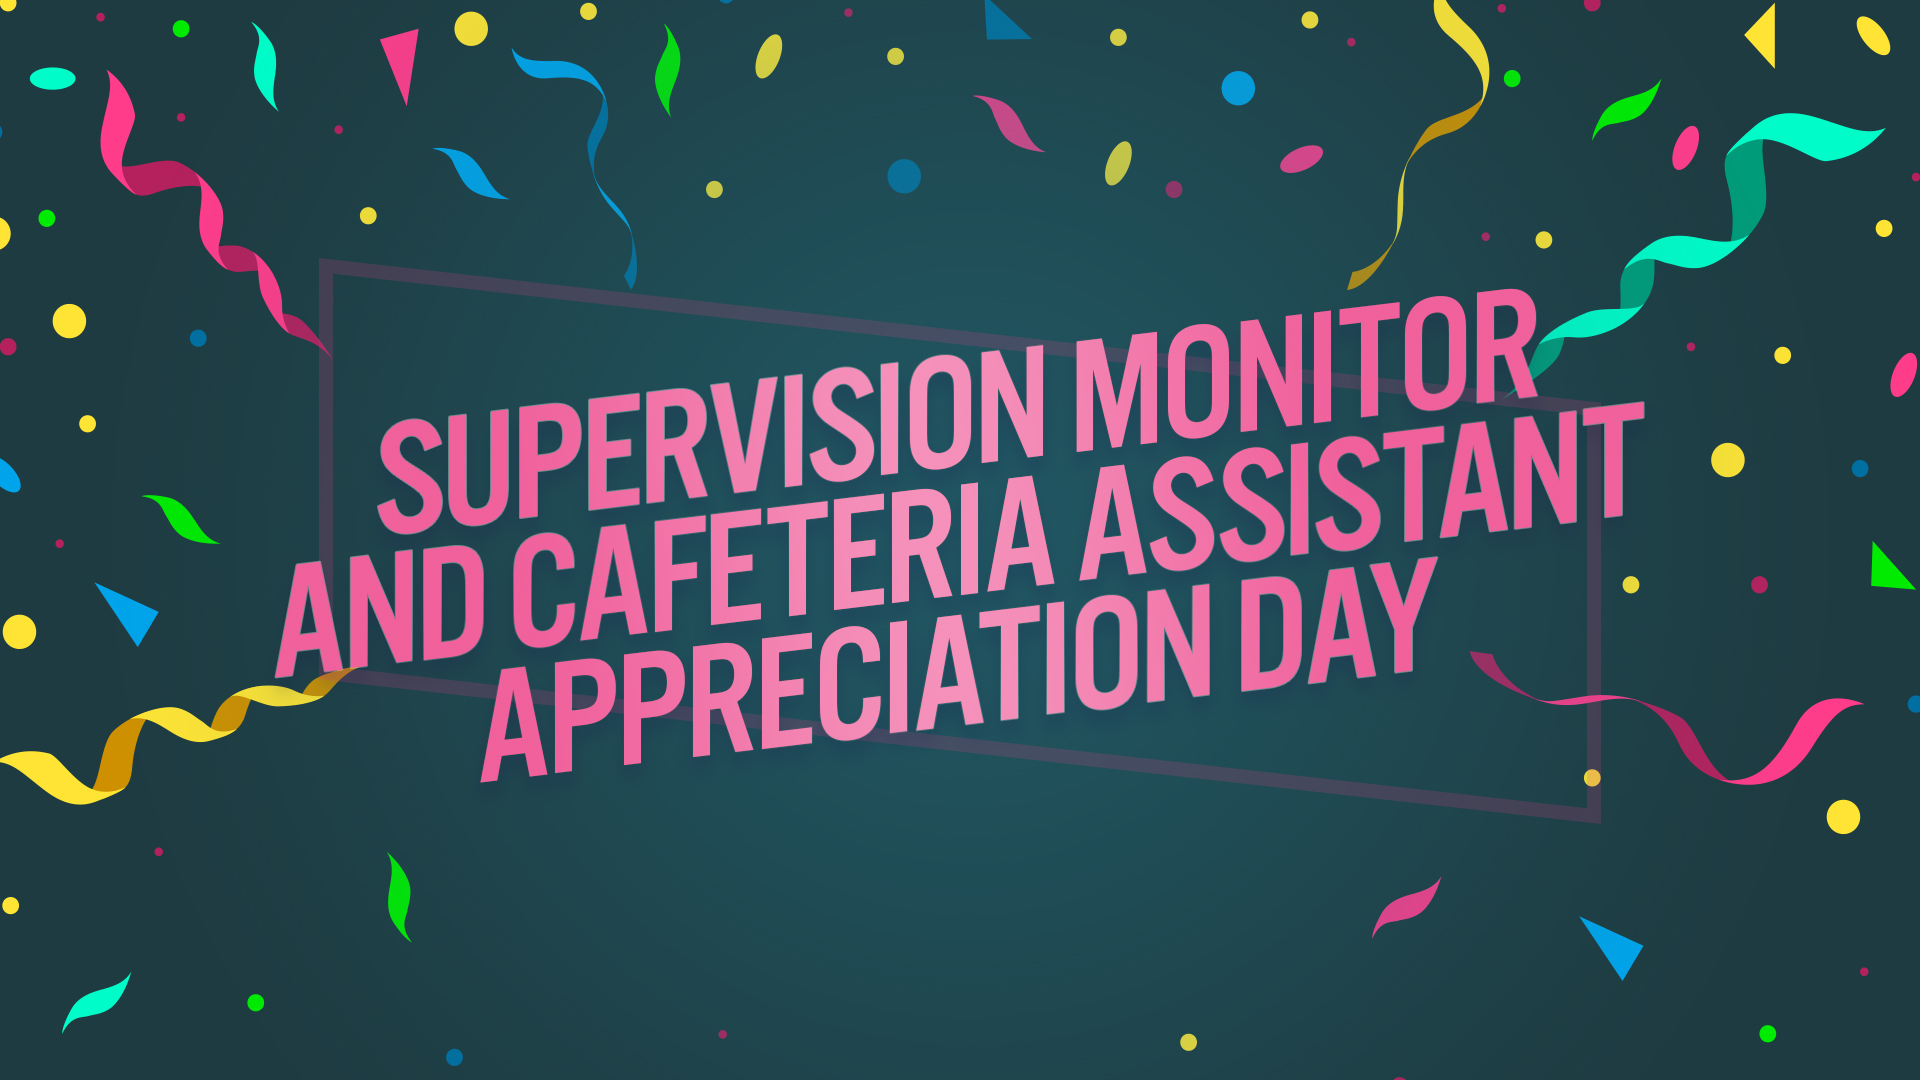 Supervision Monitor and Cafeteria Assistant Appreciation Day